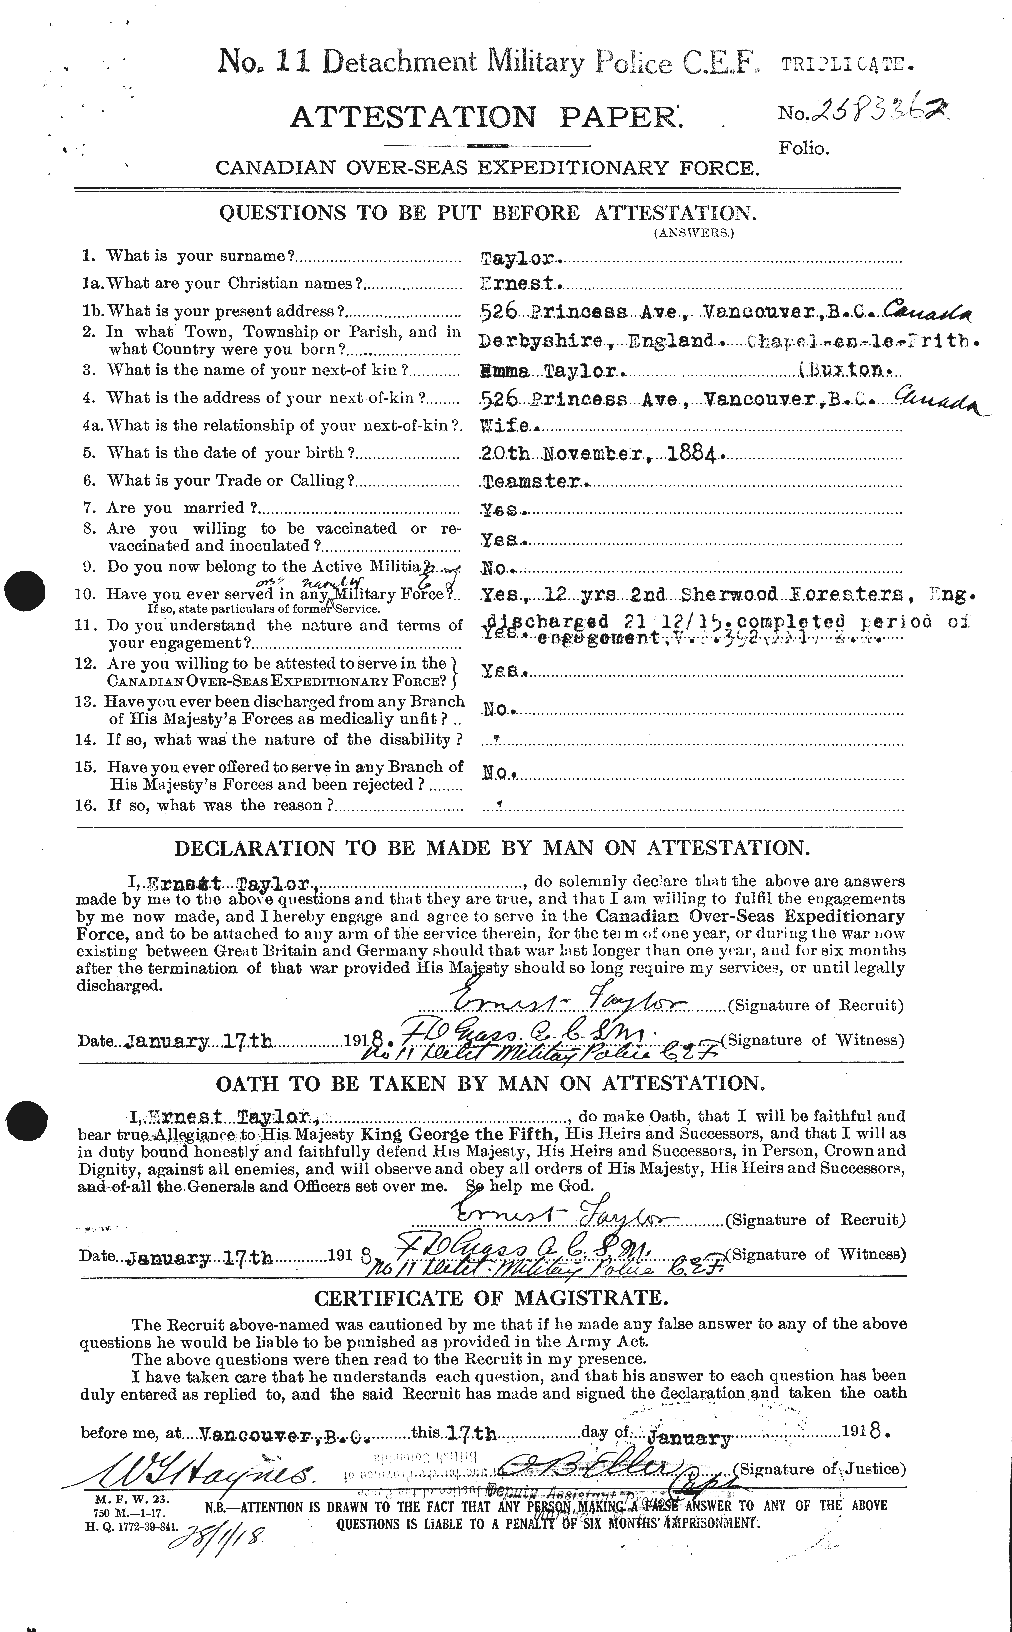 Personnel Records of the First World War - CEF 627373a